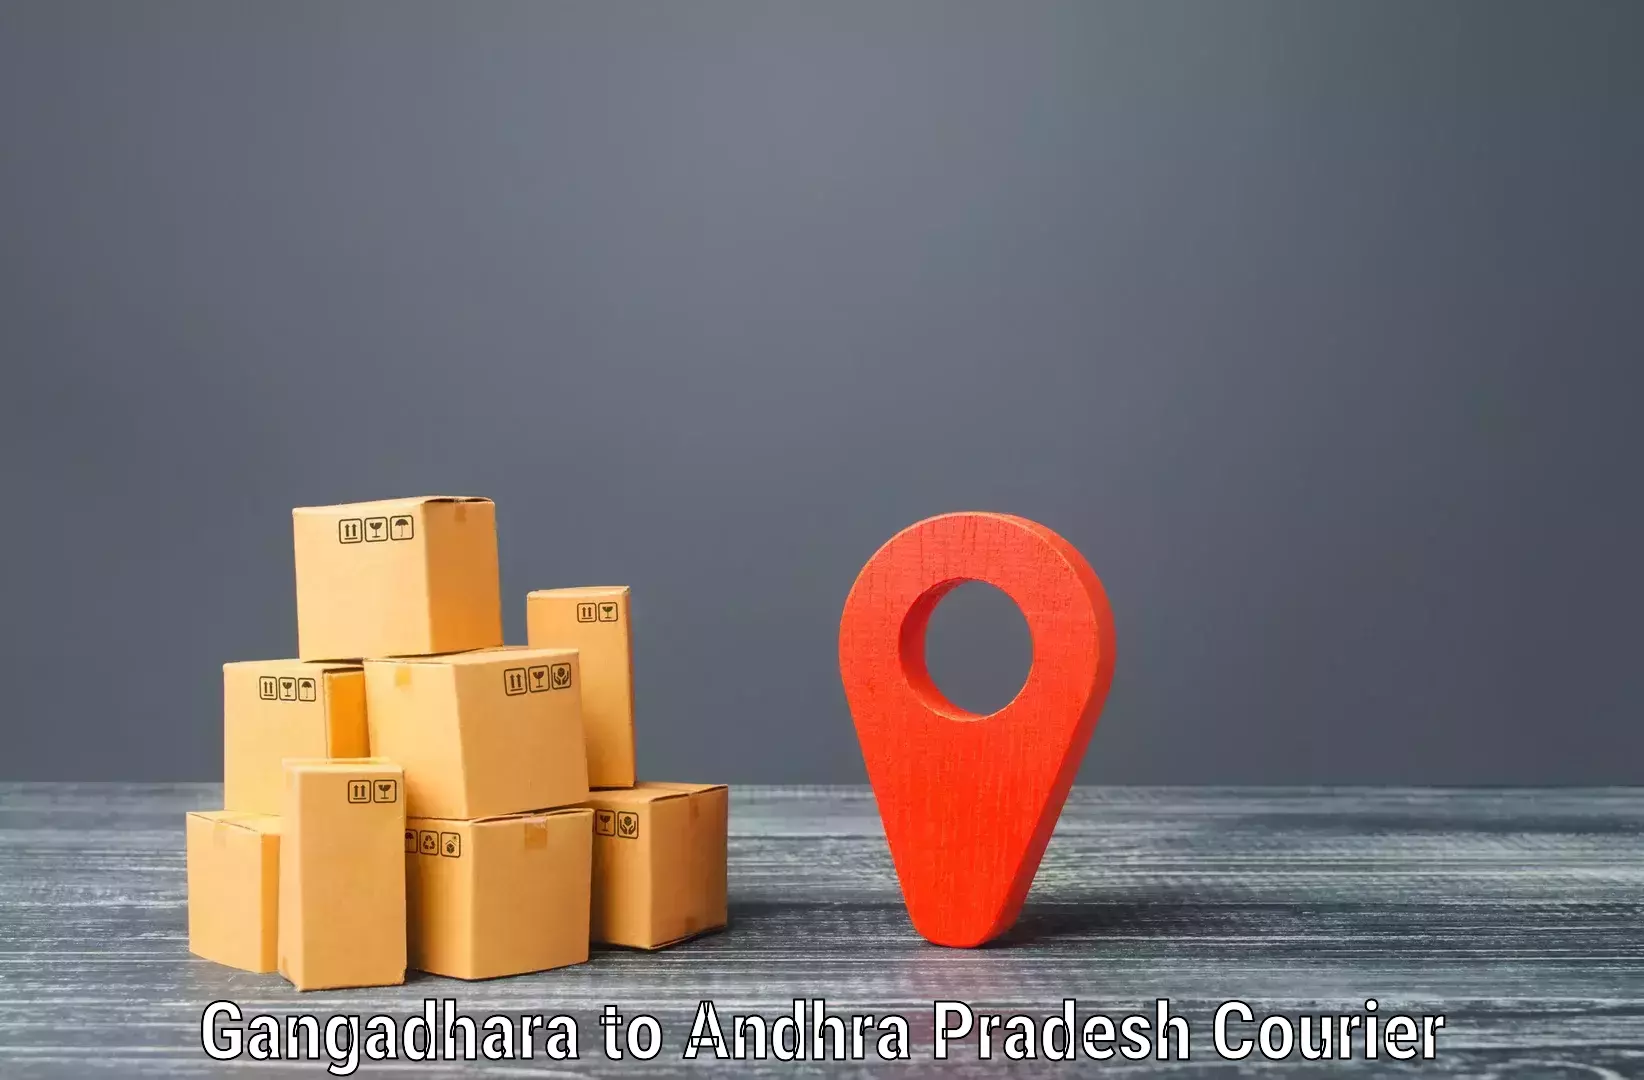 State-of-the-art courier technology in Gangadhara to Sattenapalle